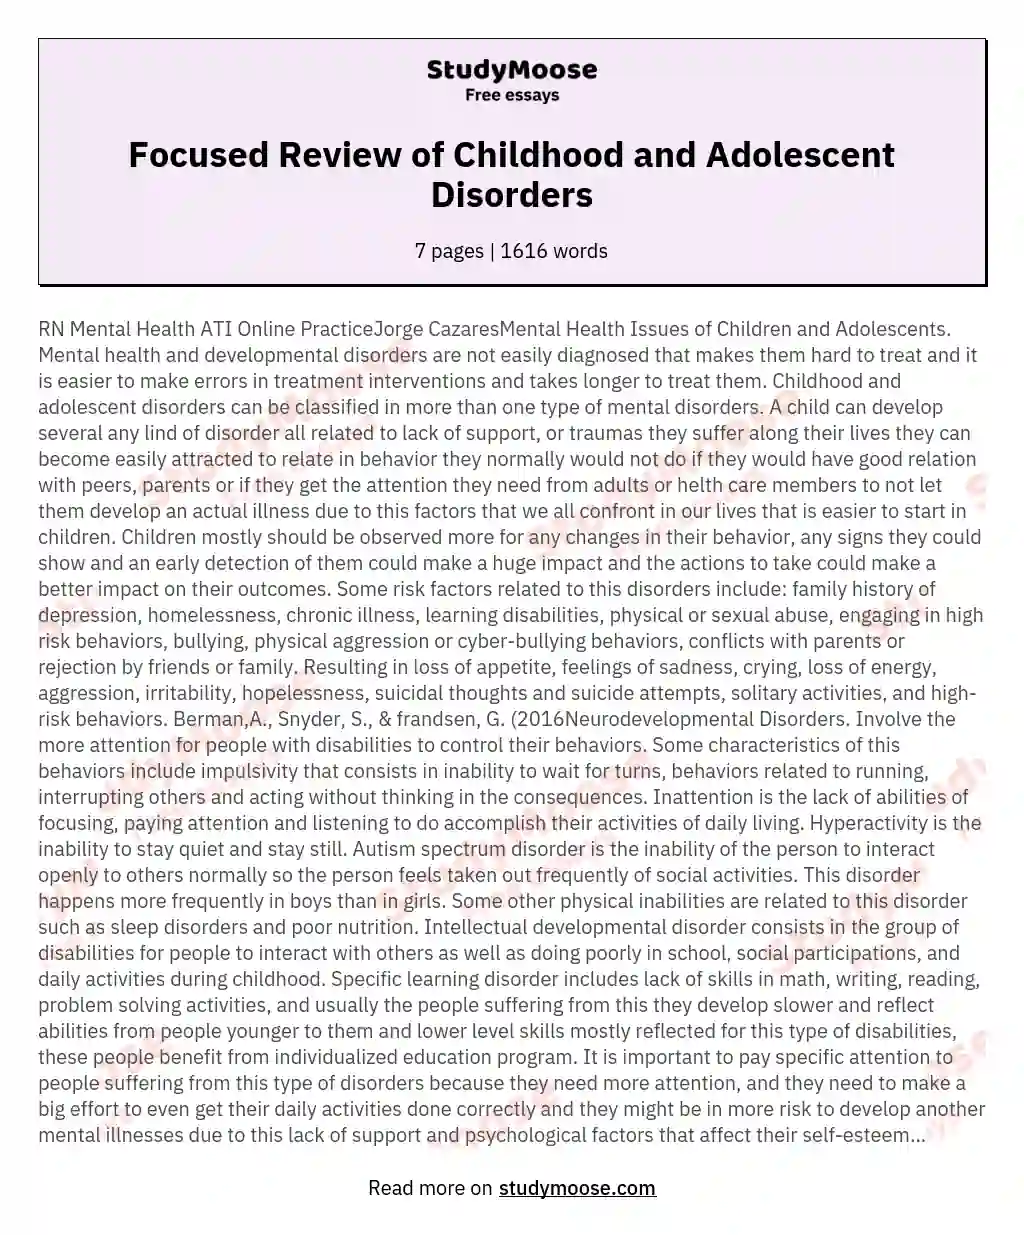 Focused Review of Childhood and Adolescent Disorders essay